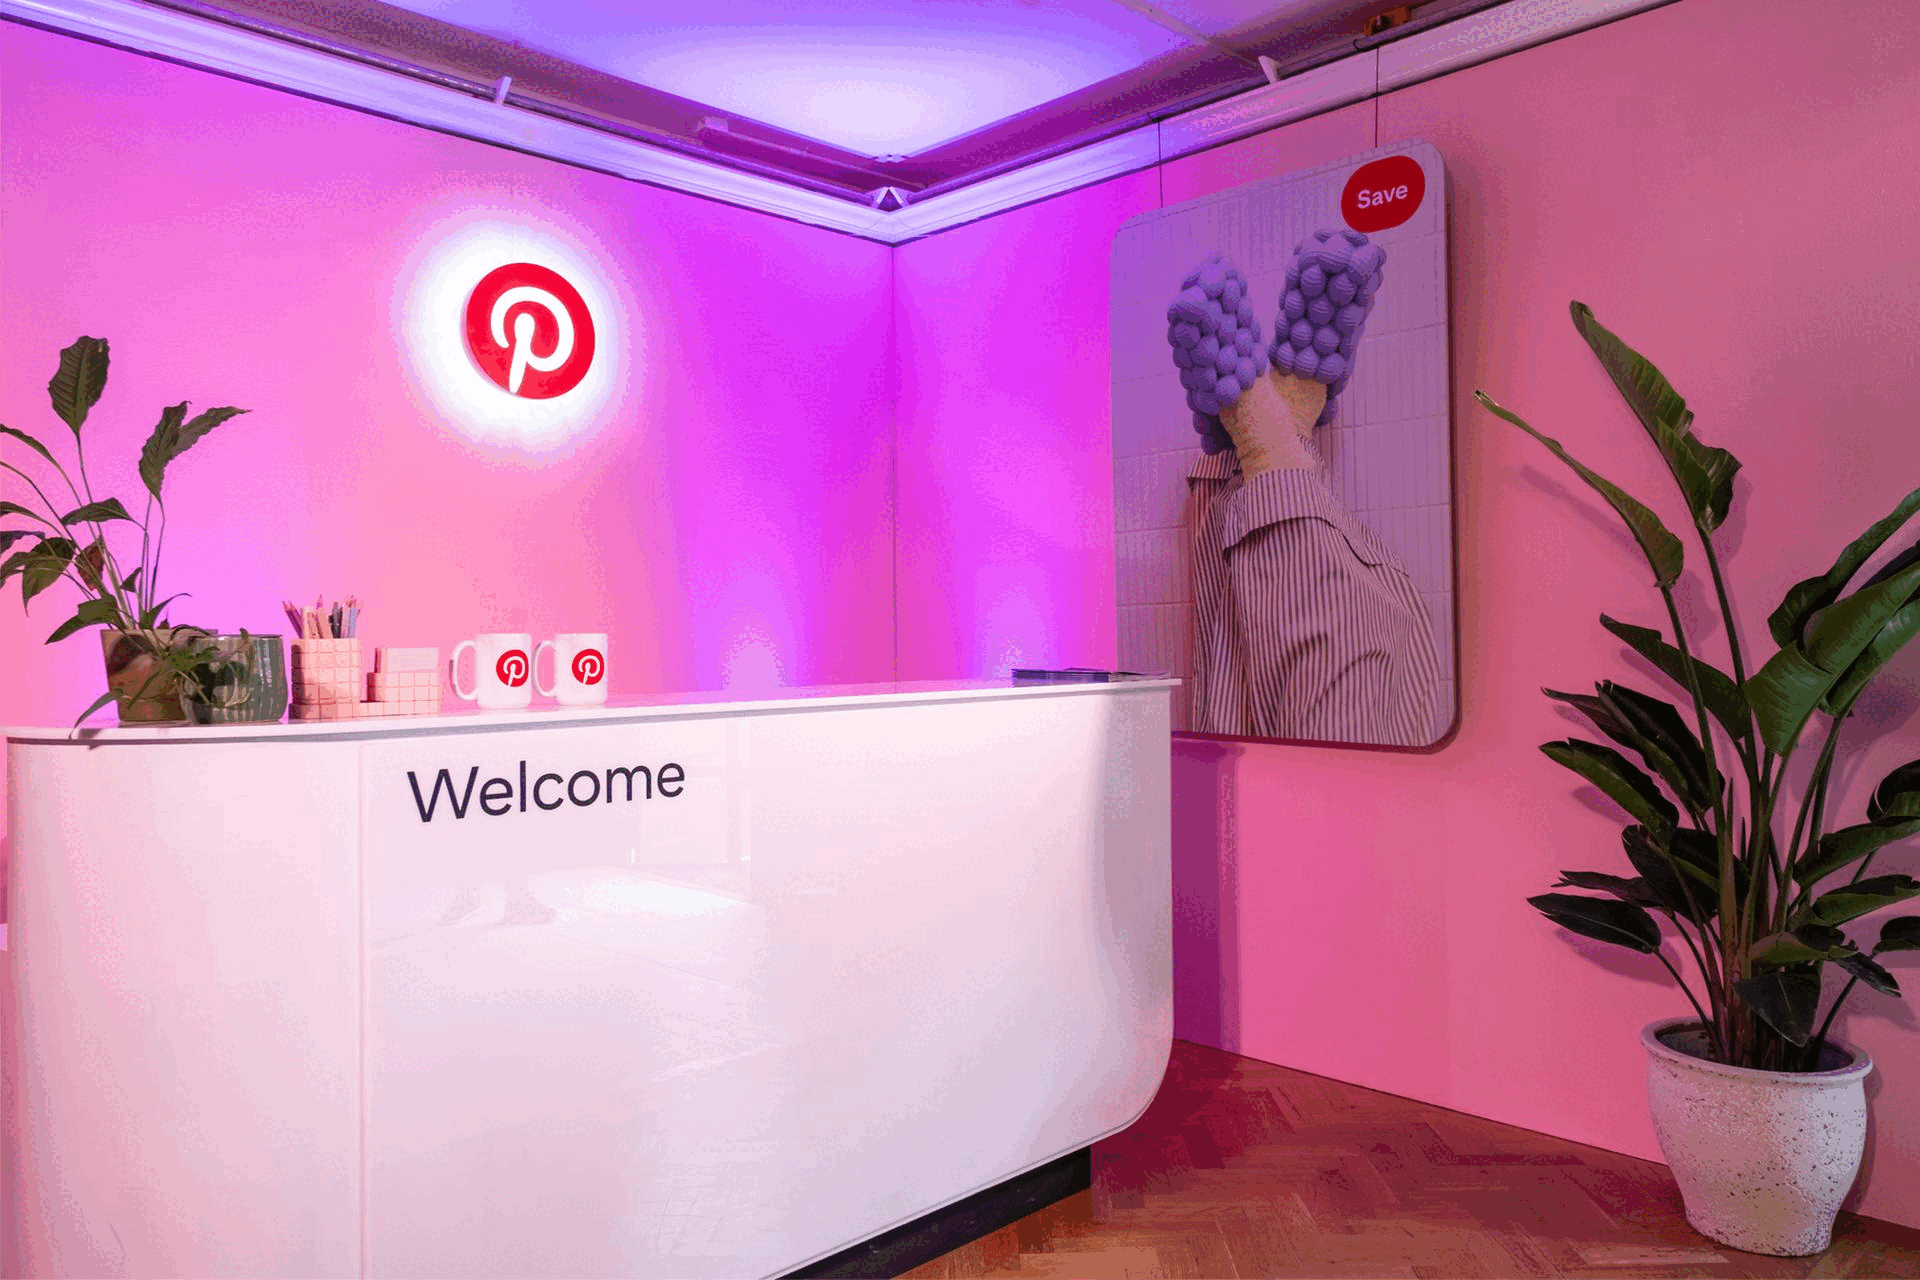 In Pictures: Pinterest ‘disrupts expectations’ at annual advertiser summit – Pinvision